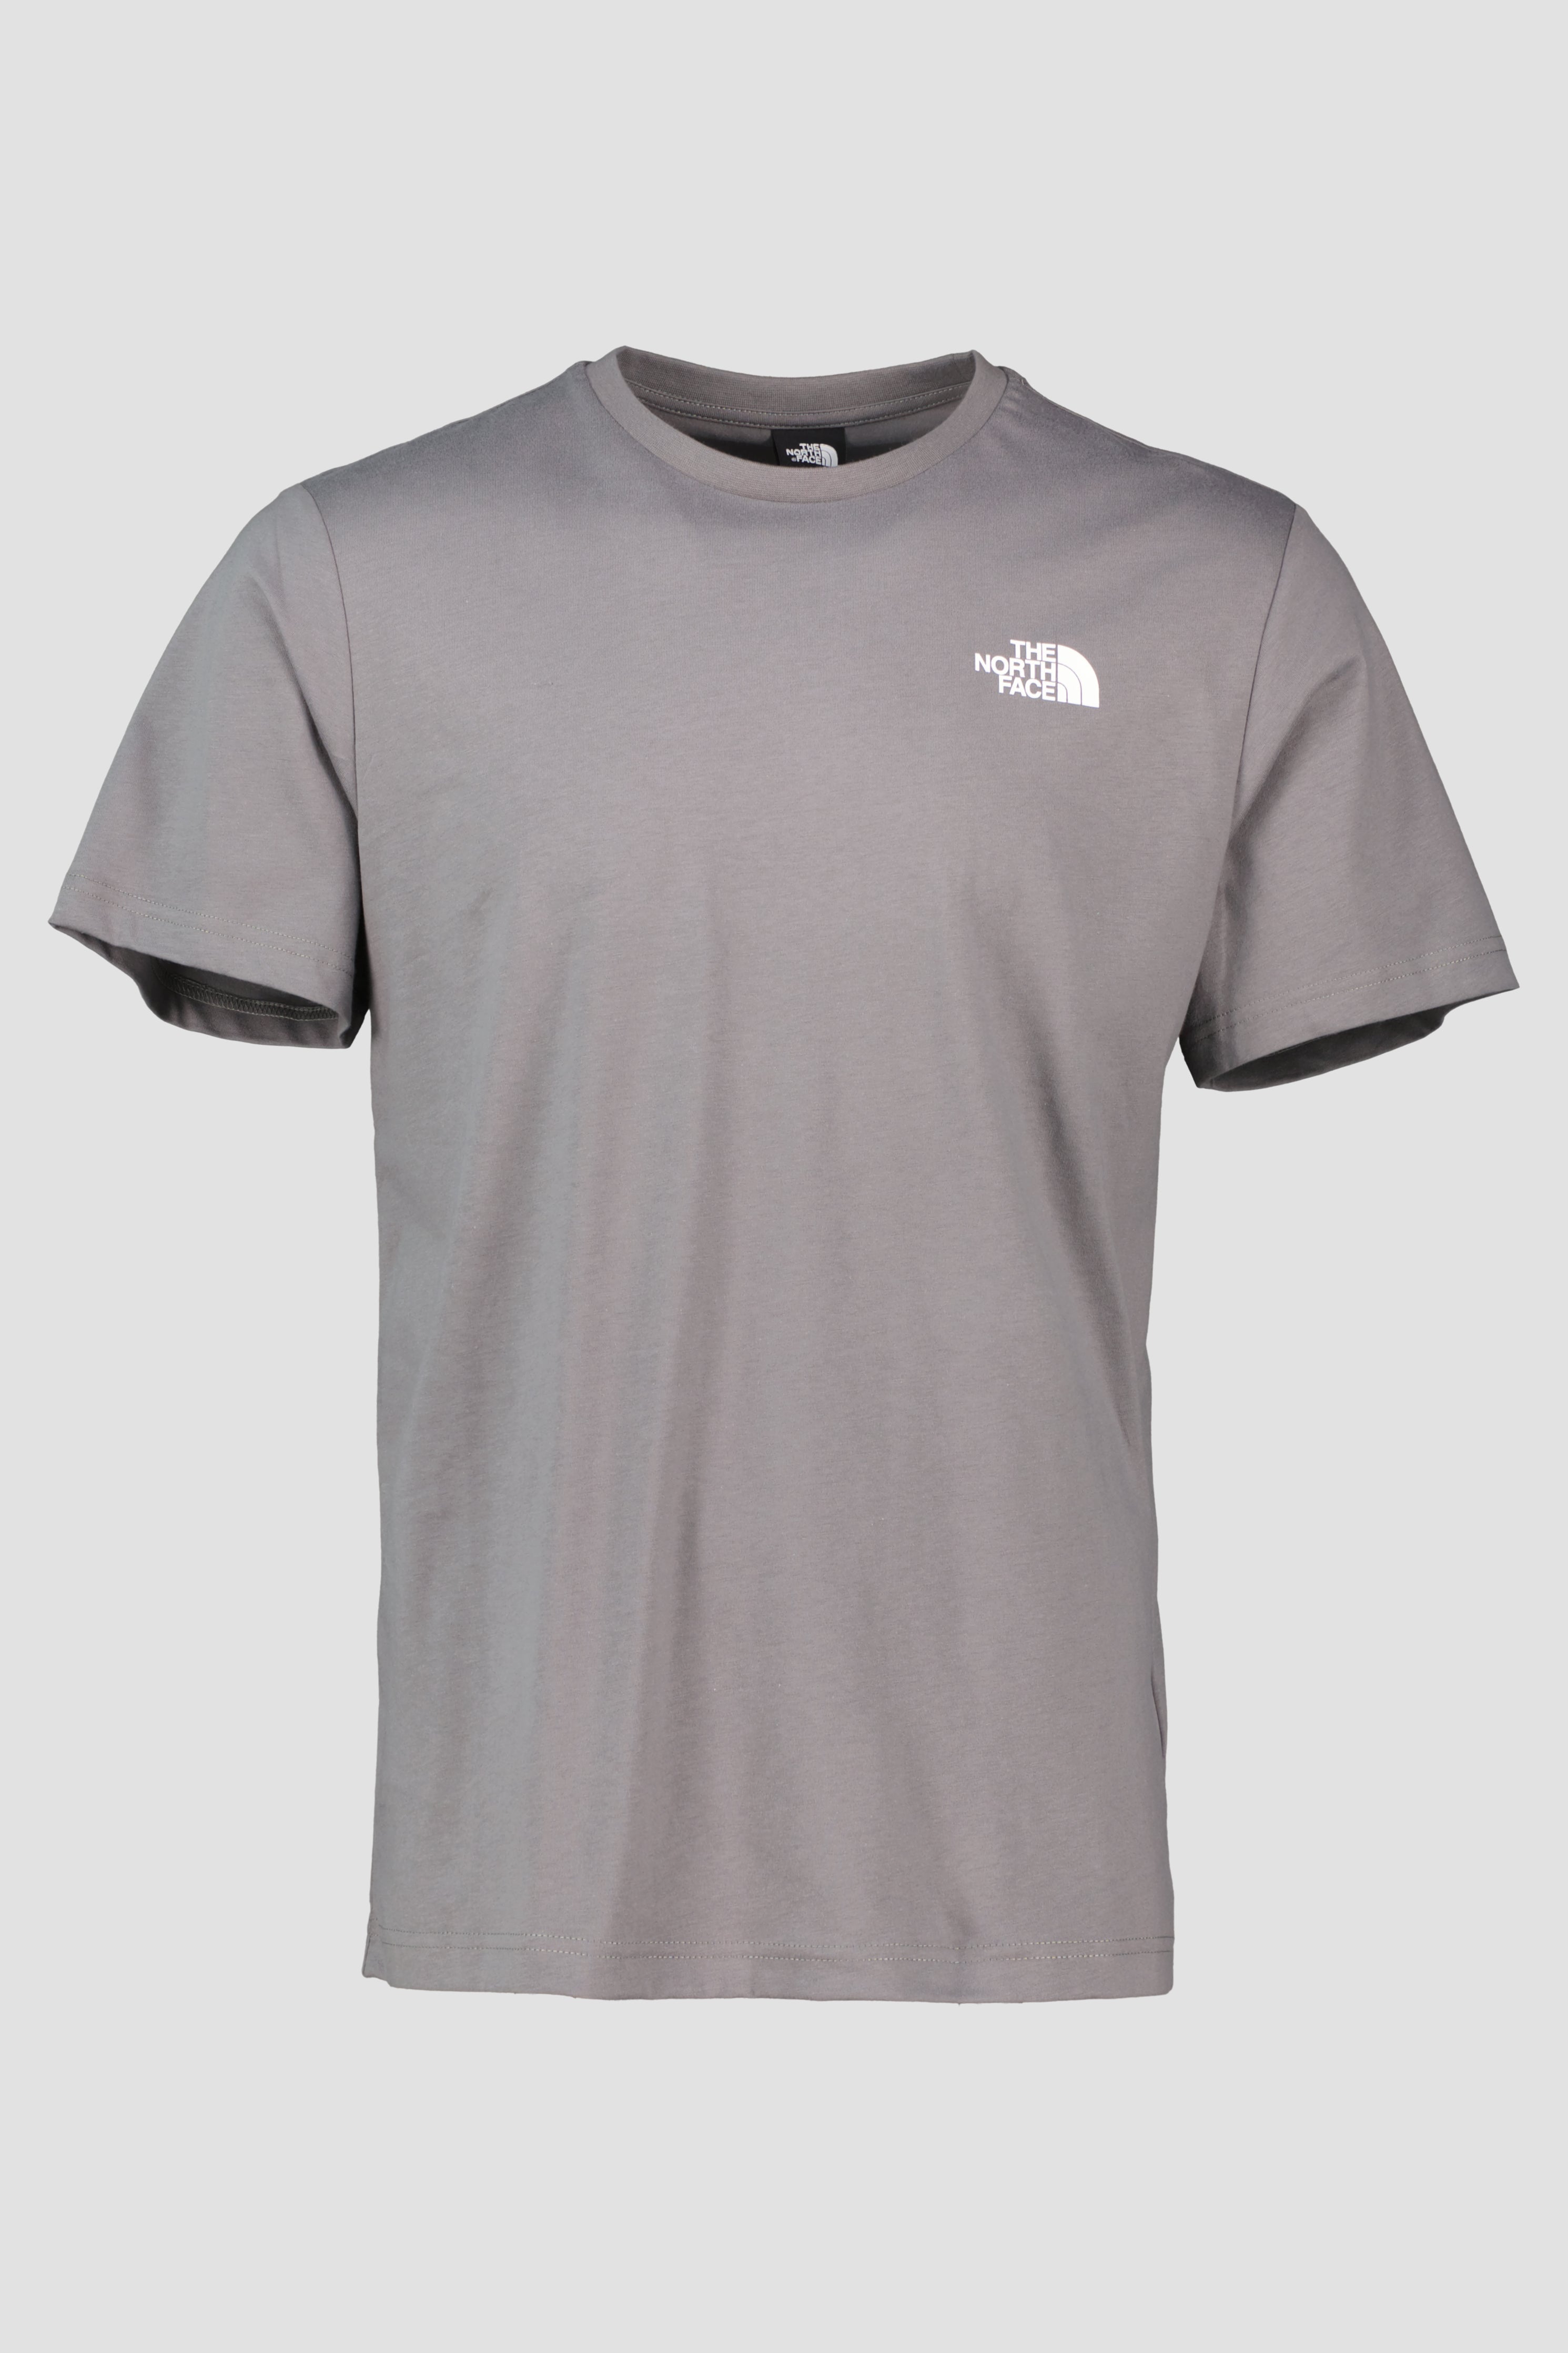 Men's The North Face Smoked Pearl Blue Short Sleeve T Shirt